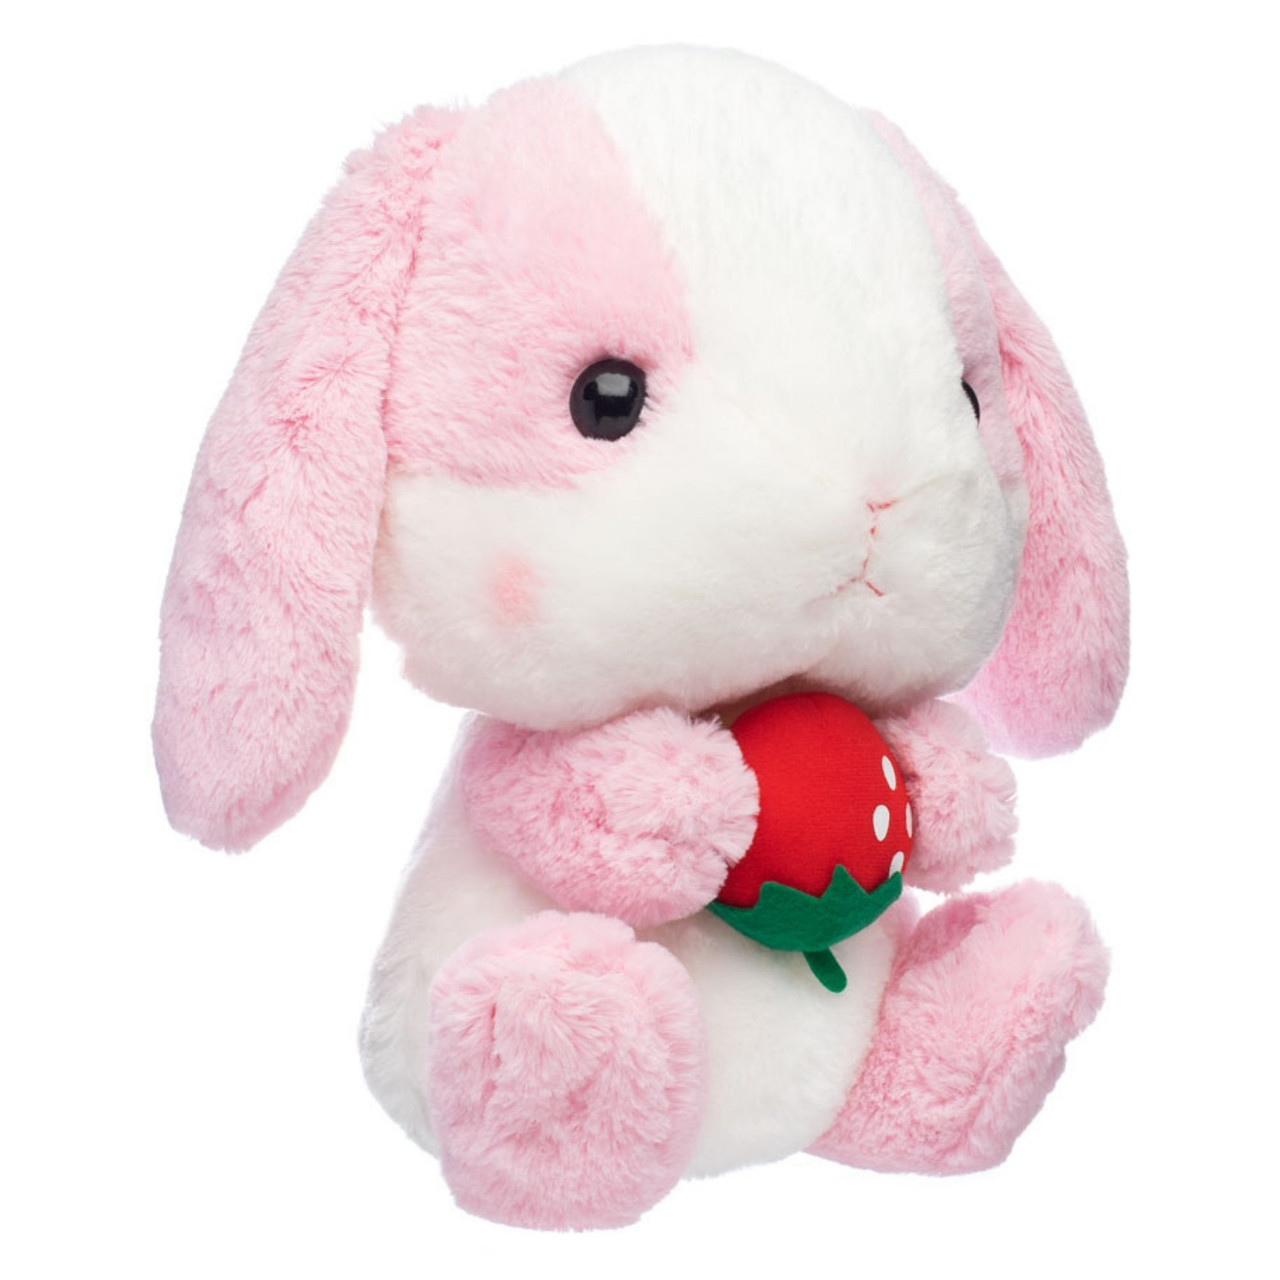 Any chance I could get a Bunny Business for this pink Tritan